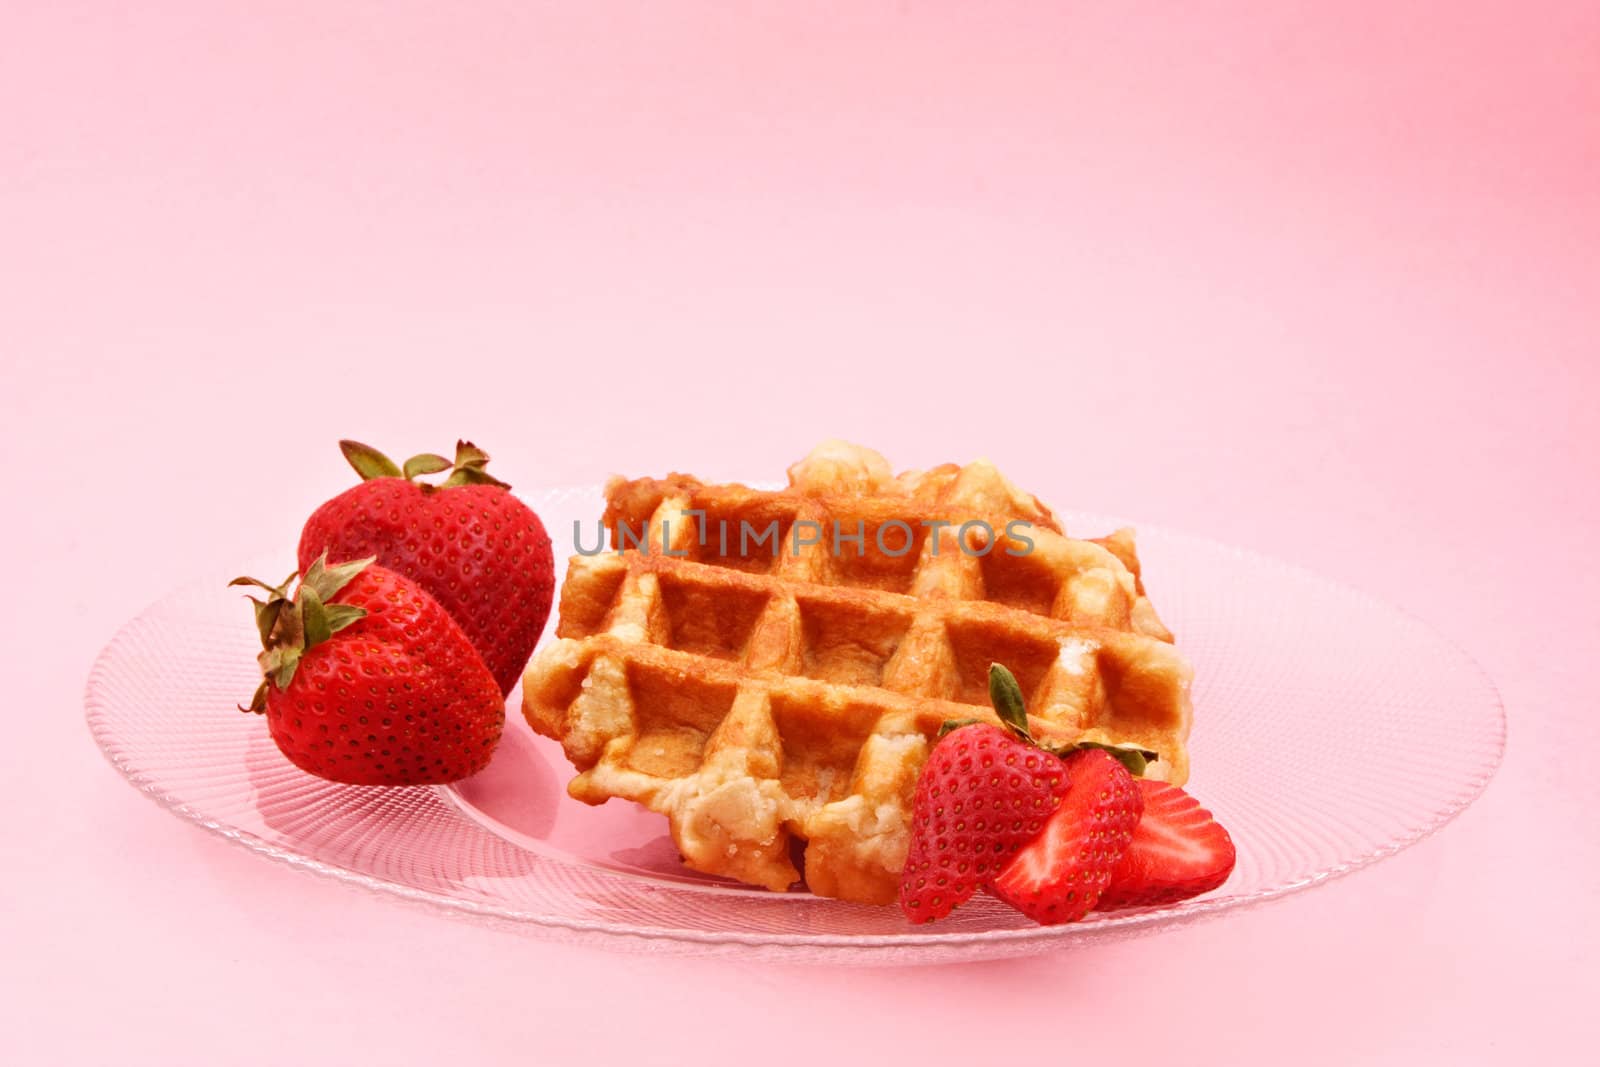 waffle and strawberries by lanalanglois